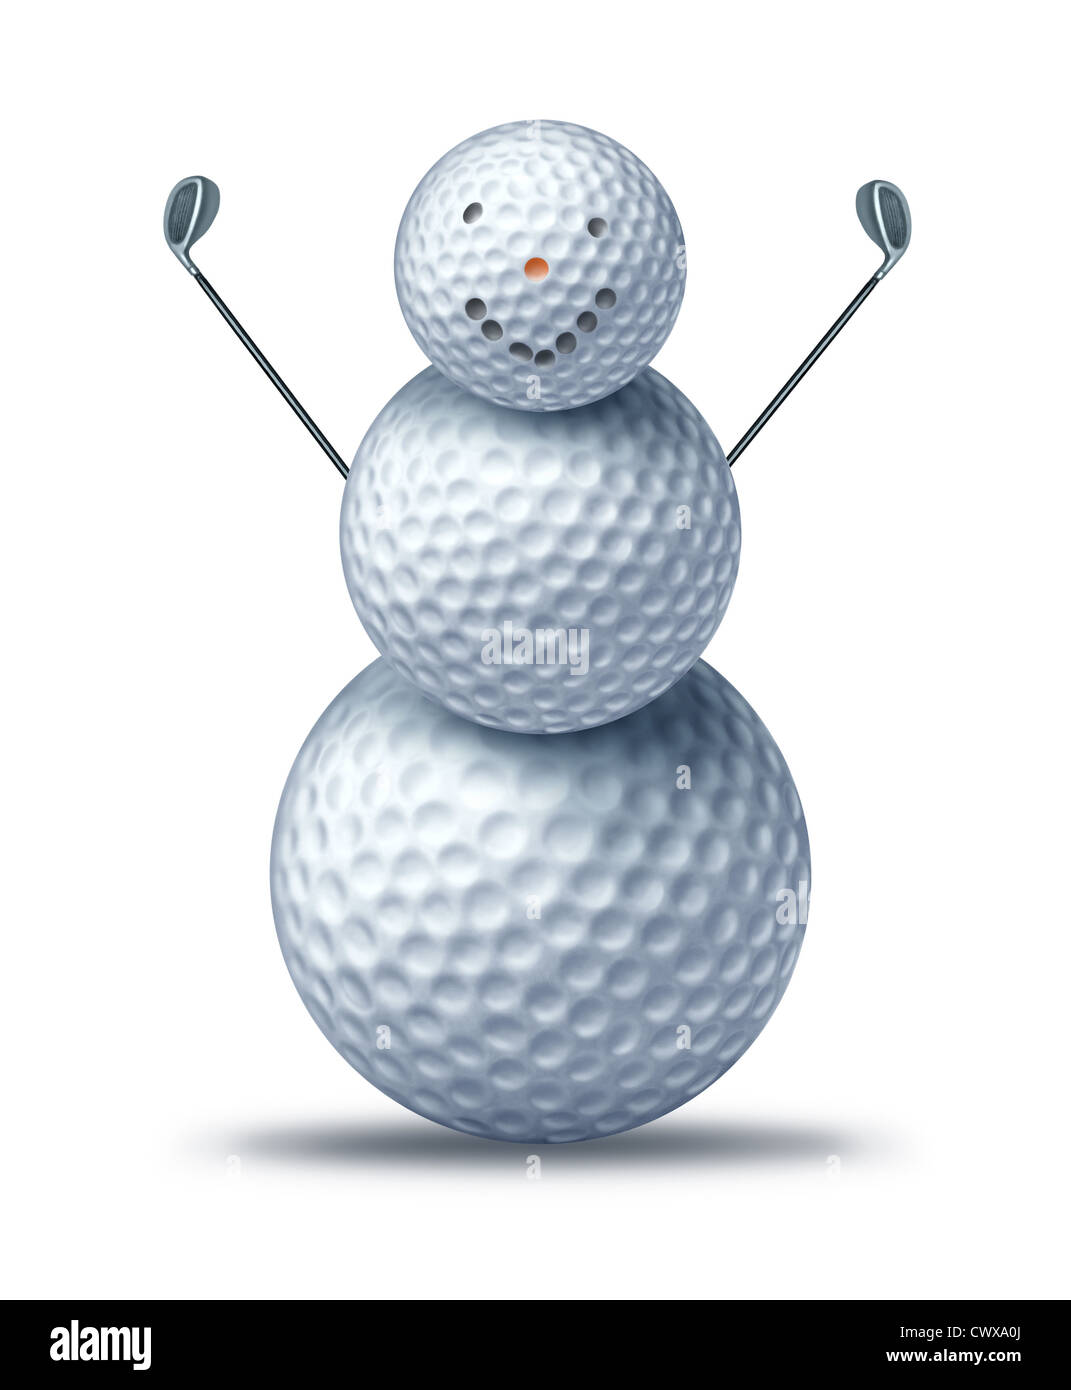 Winter golfing and holiday golf symbol represented by golf balls placed to look like a happy smiling snow man or snowman holding driver golf clubs showing winter holiday activities for seasonal sports leisure vacation at a resort. Stock Photo